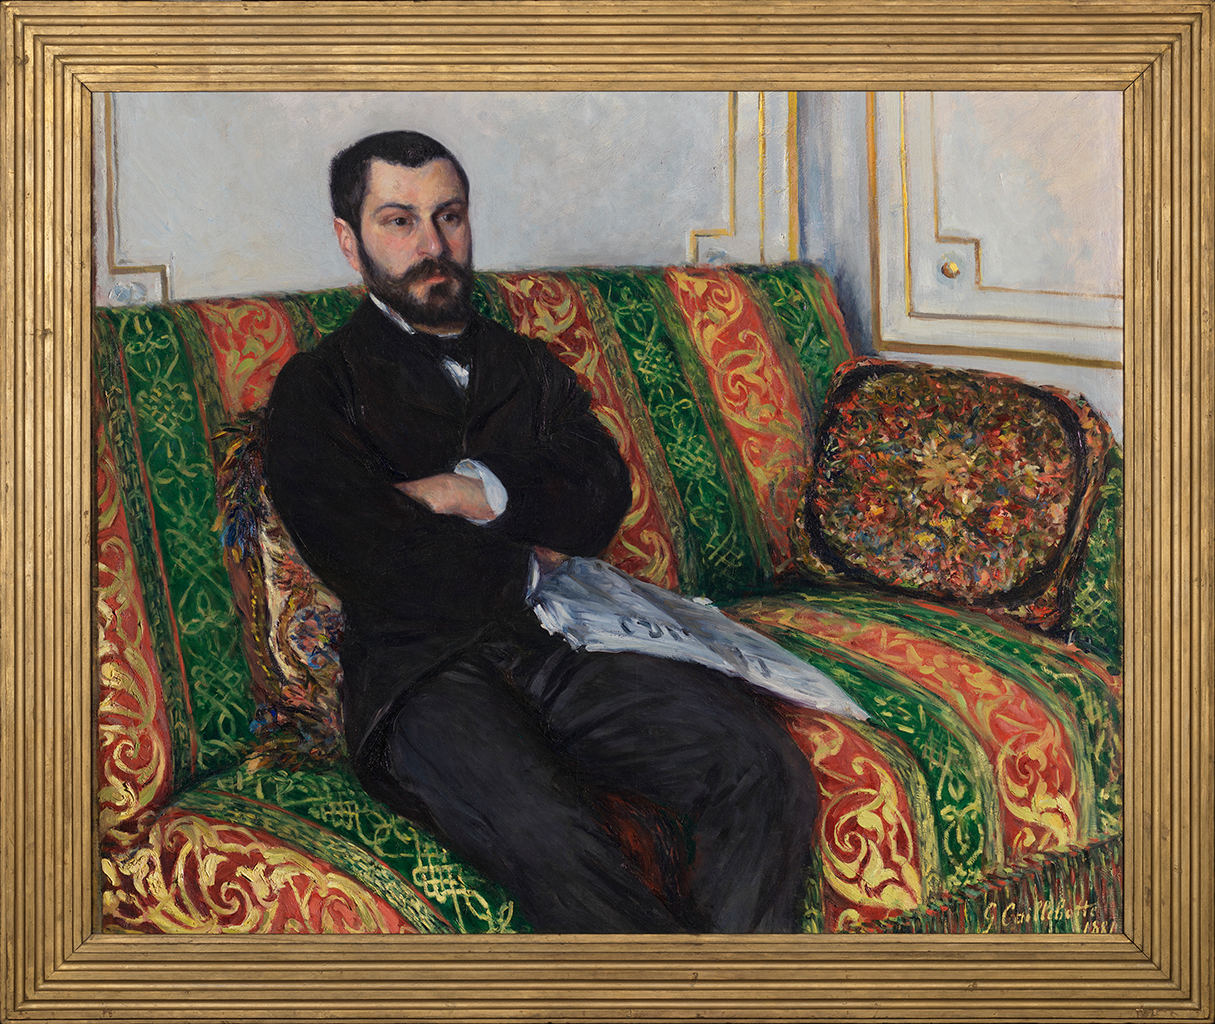 A painting depicting a man sitting on a vertically striped orange and green sofa with his arms crossed over his chest. The man wears a black coat and a black bowtie around his neck. A stack of papers lay on the side of his lap. The painting has a gold frame around it.